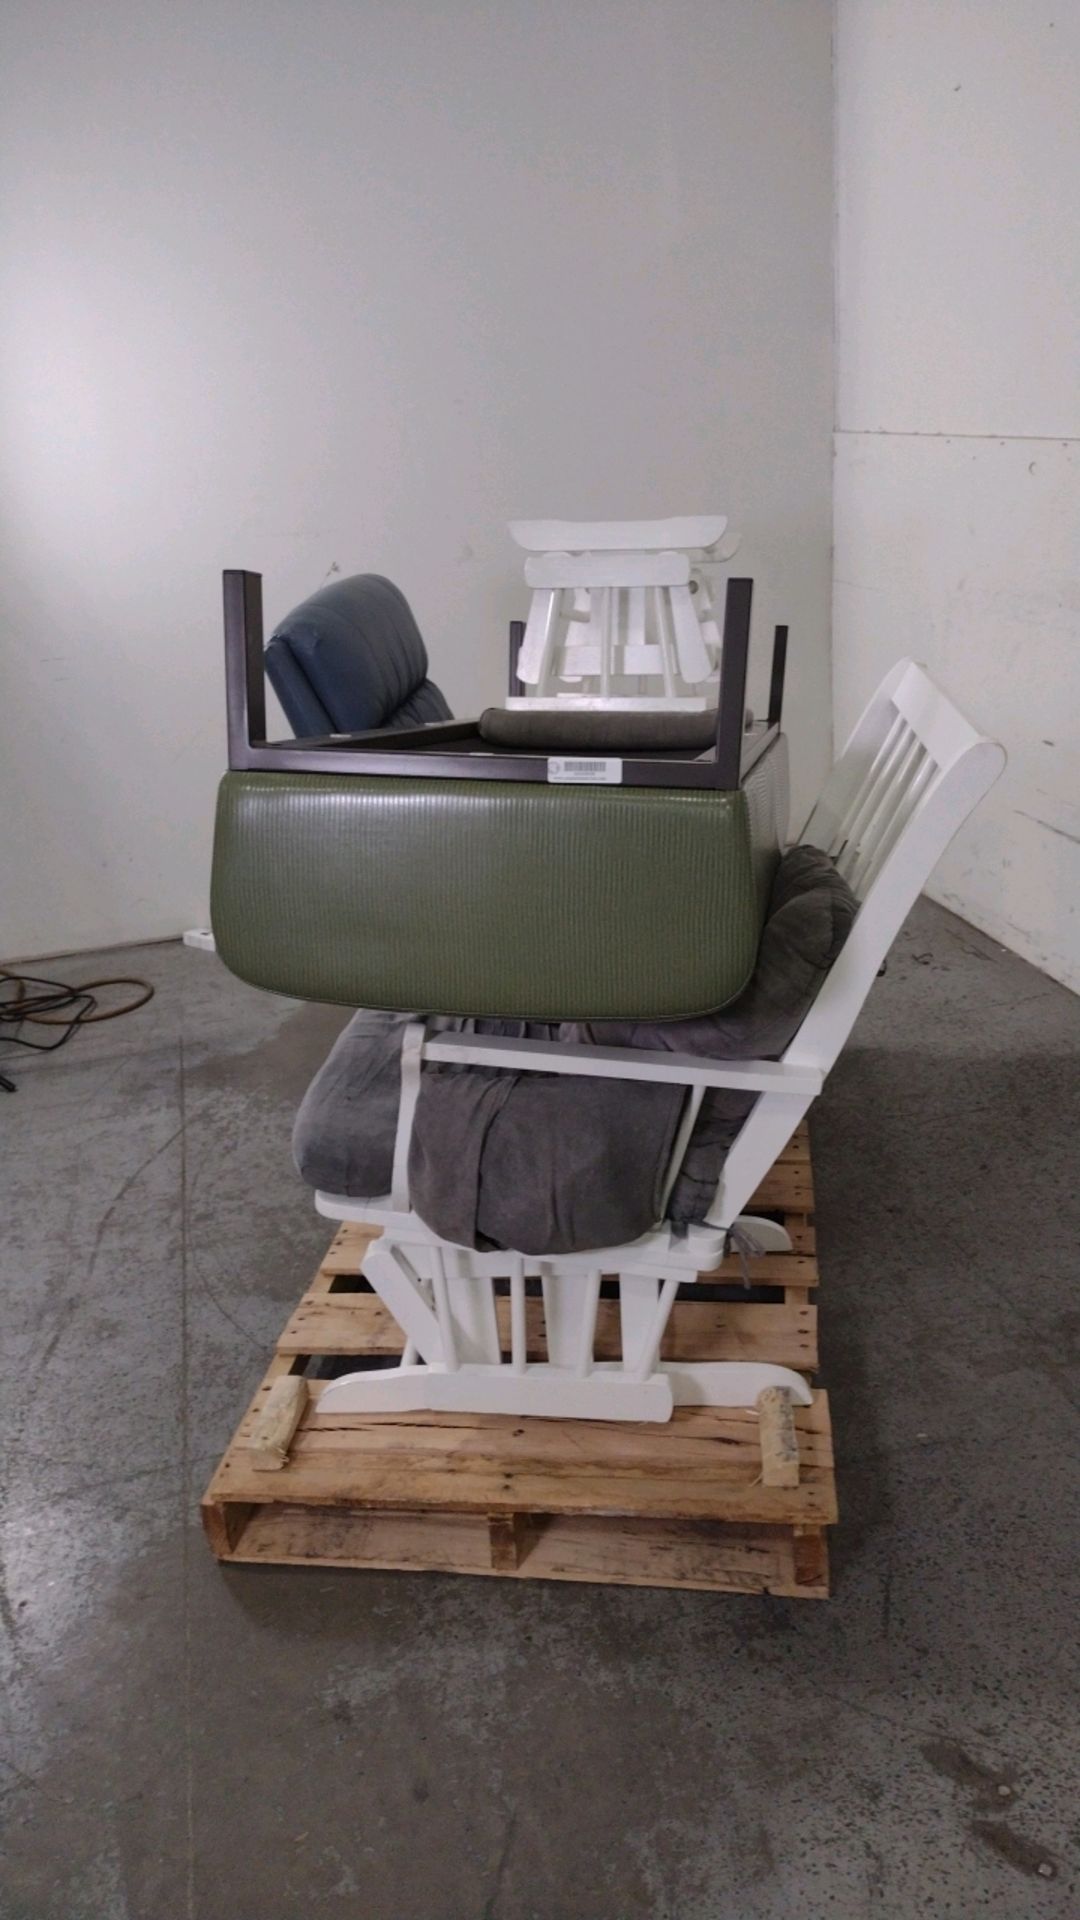 RECLINER, ROCKING CHAIR, BENCH (LOCATED AT 1825 S. 43RD AVE, SUITE B2, PHOENIX, AZ 85009) - Image 2 of 2